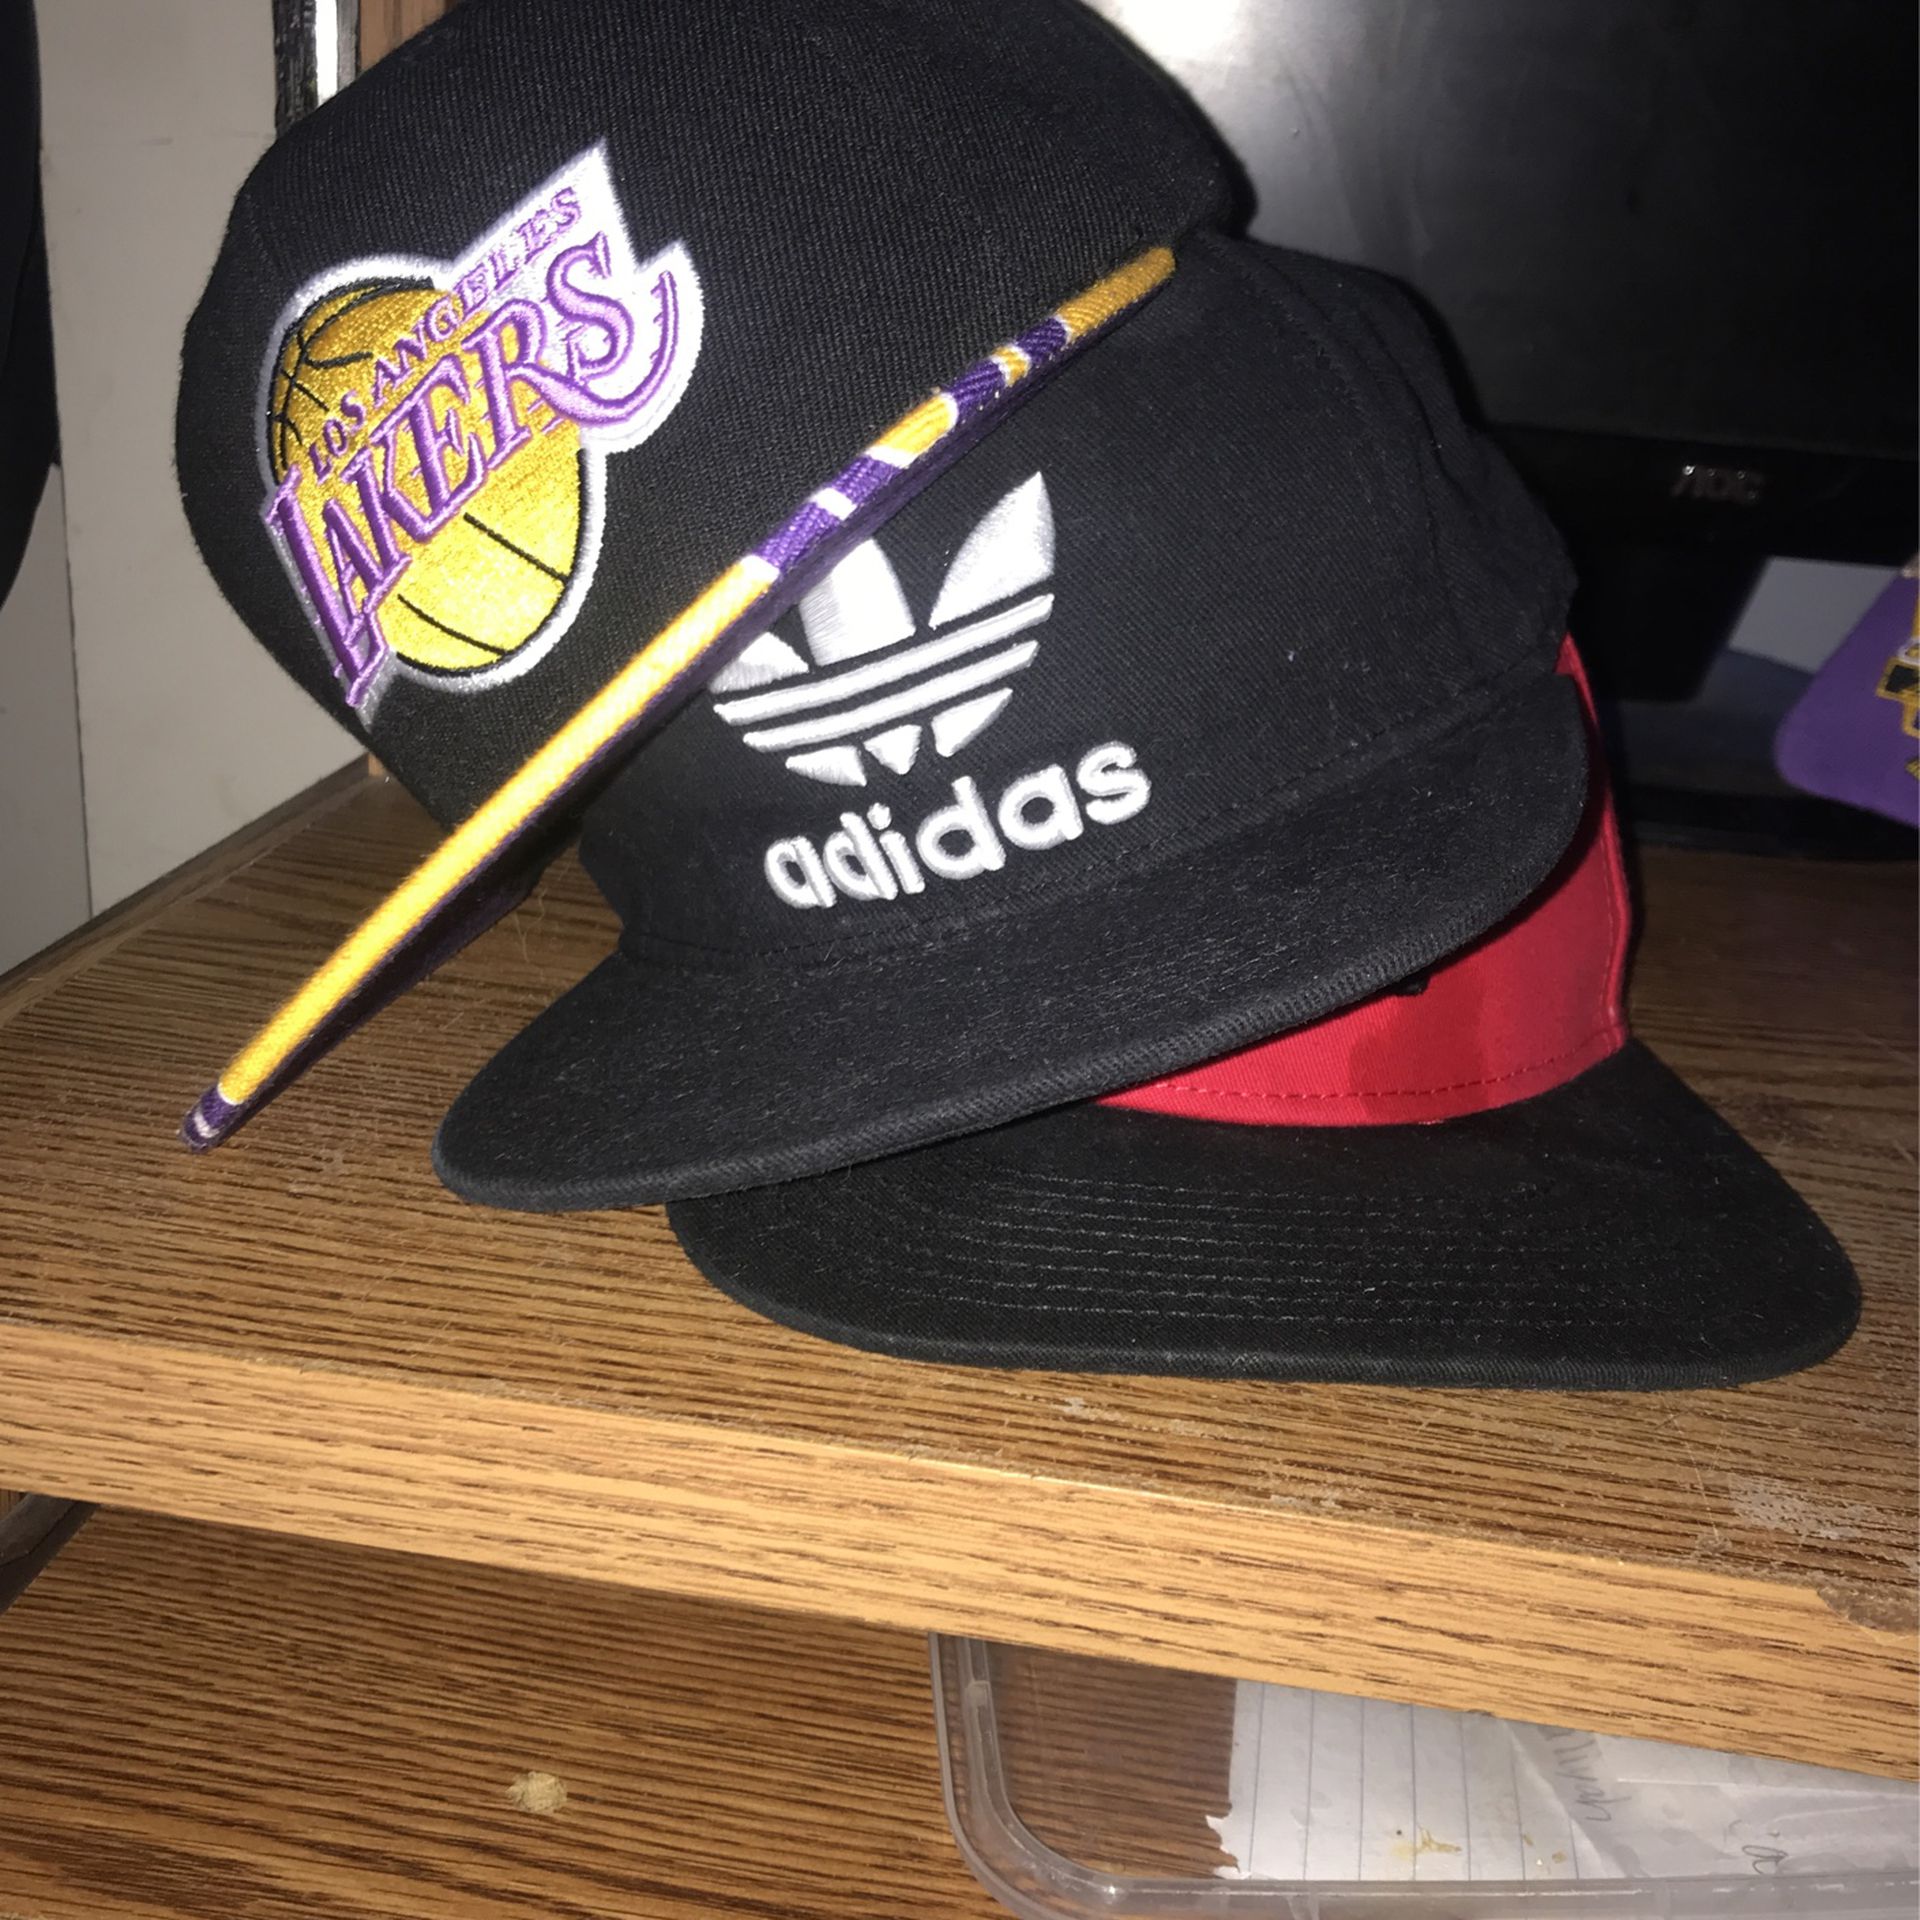 3 Hats, A Michell And Ness Hat, A Adidas And A NEFF Hat for Sale in Wichita, KS - OfferUp